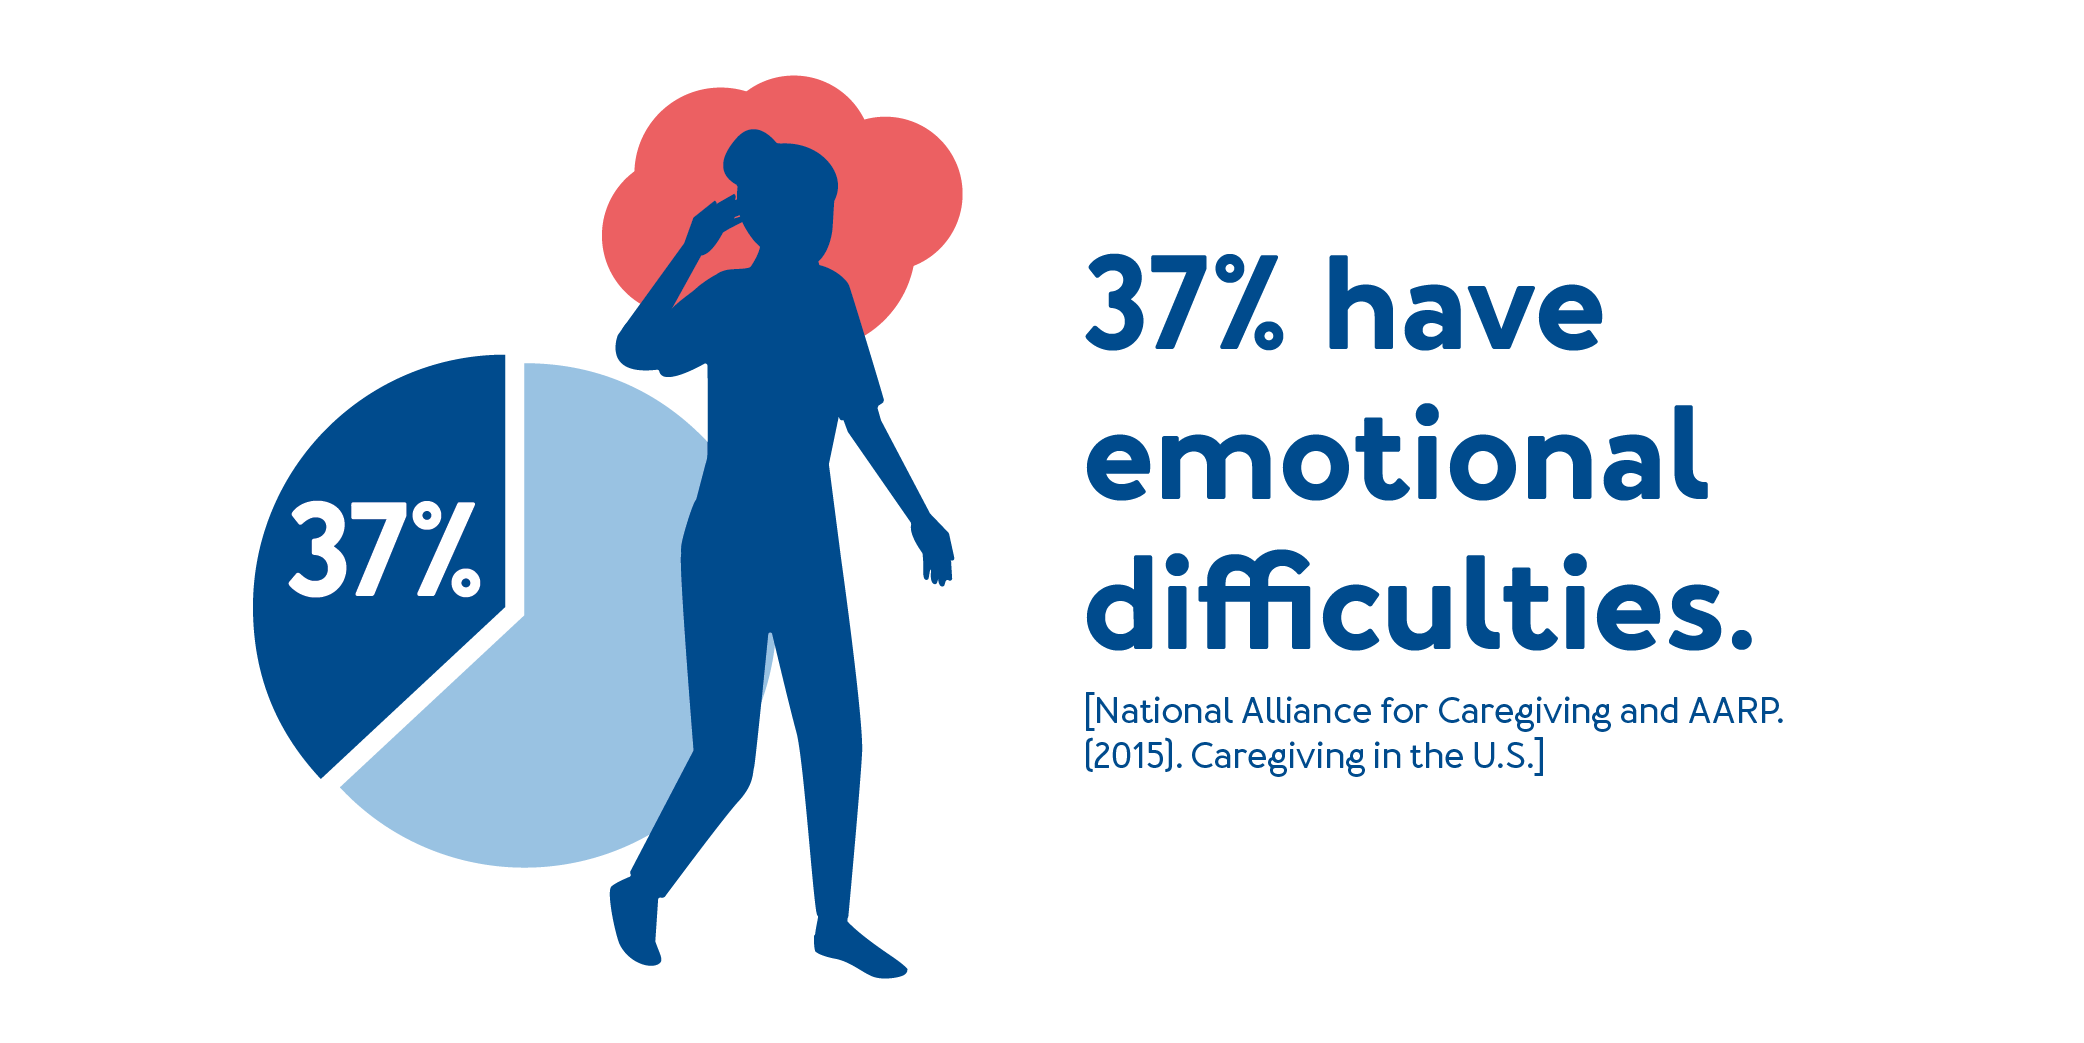 37% of caregivers have emotional difficulties